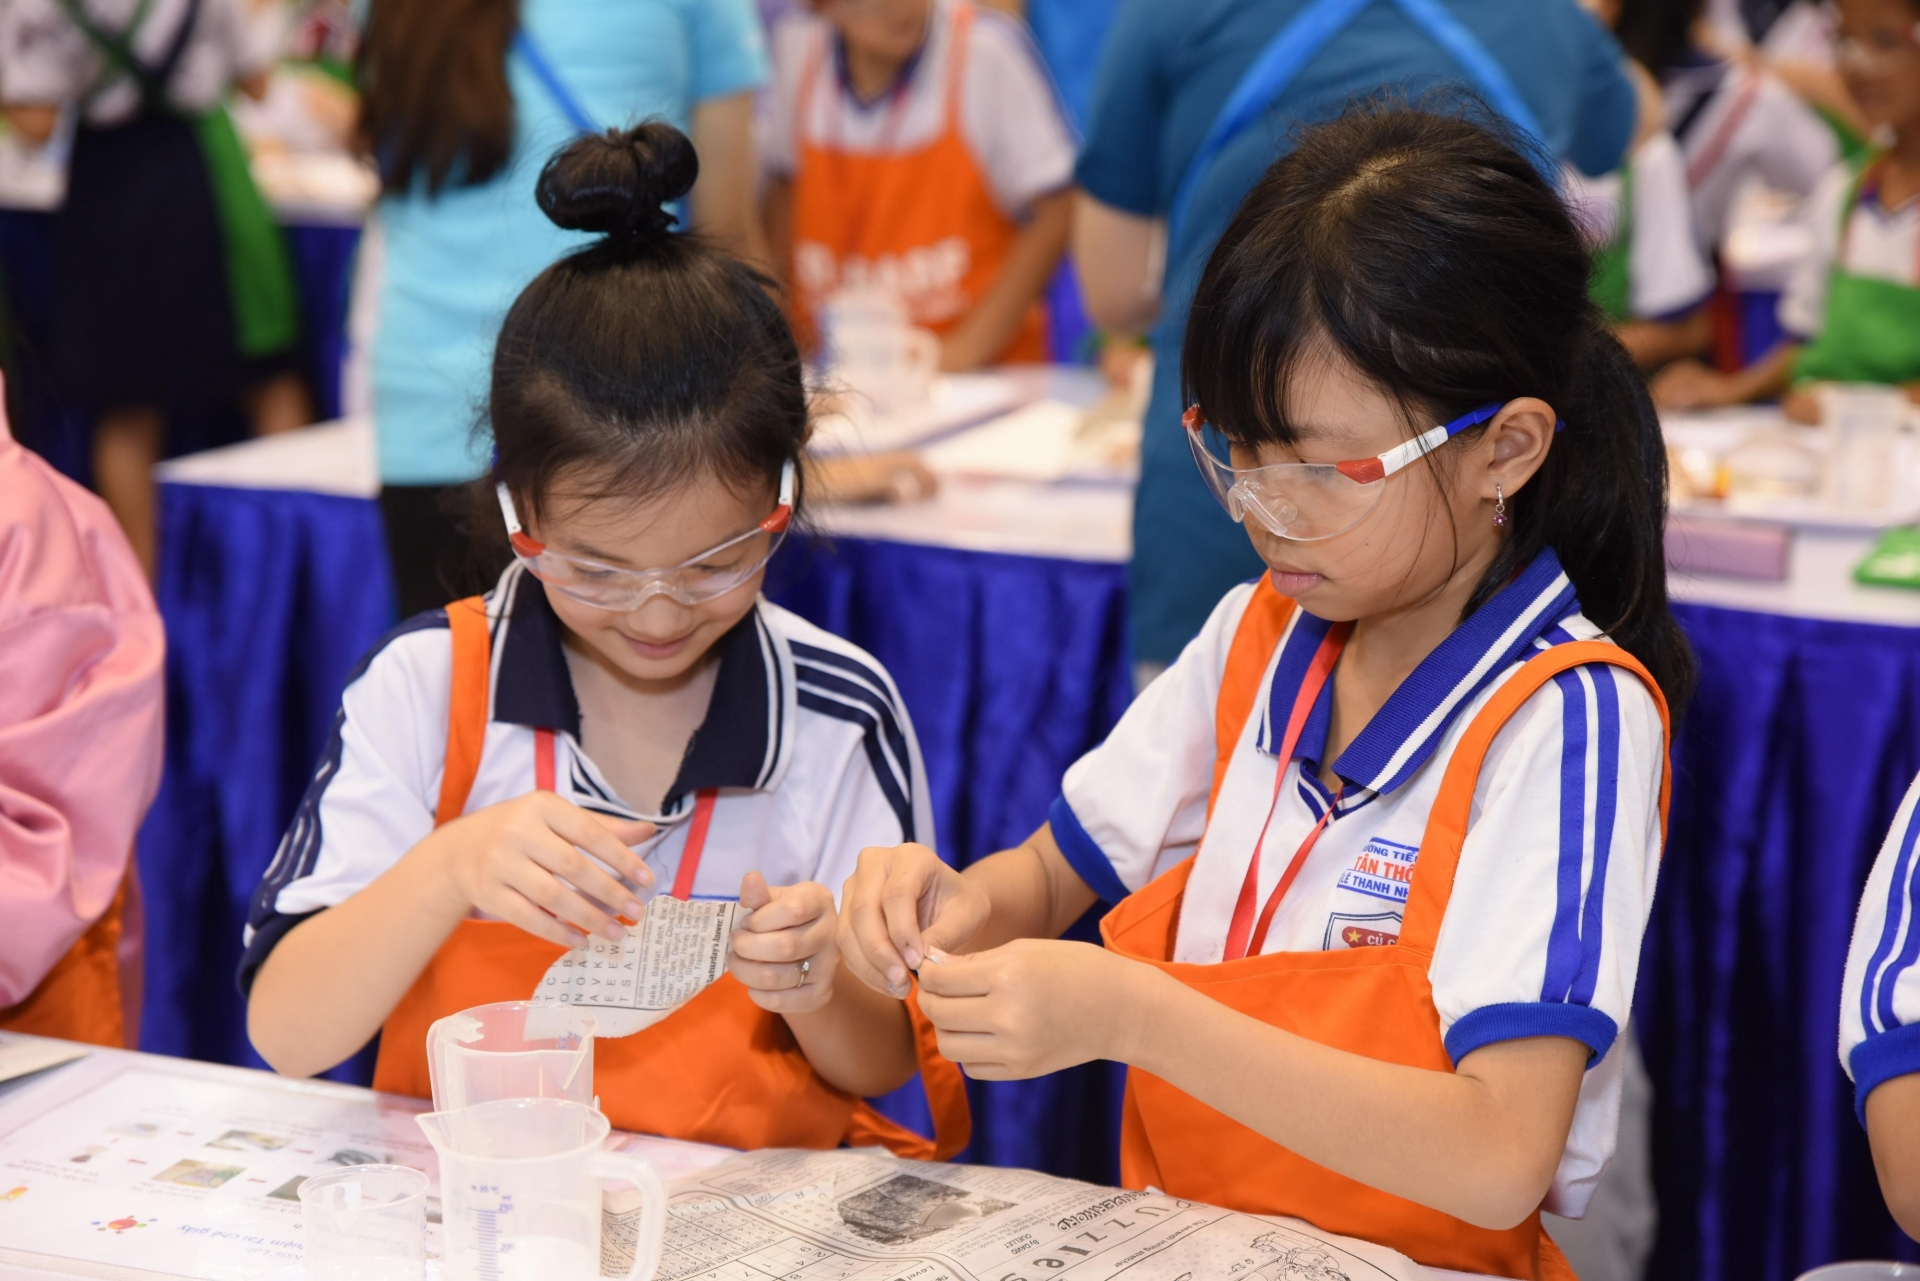 650 children learn about recycling at BASF Kids’ Lab